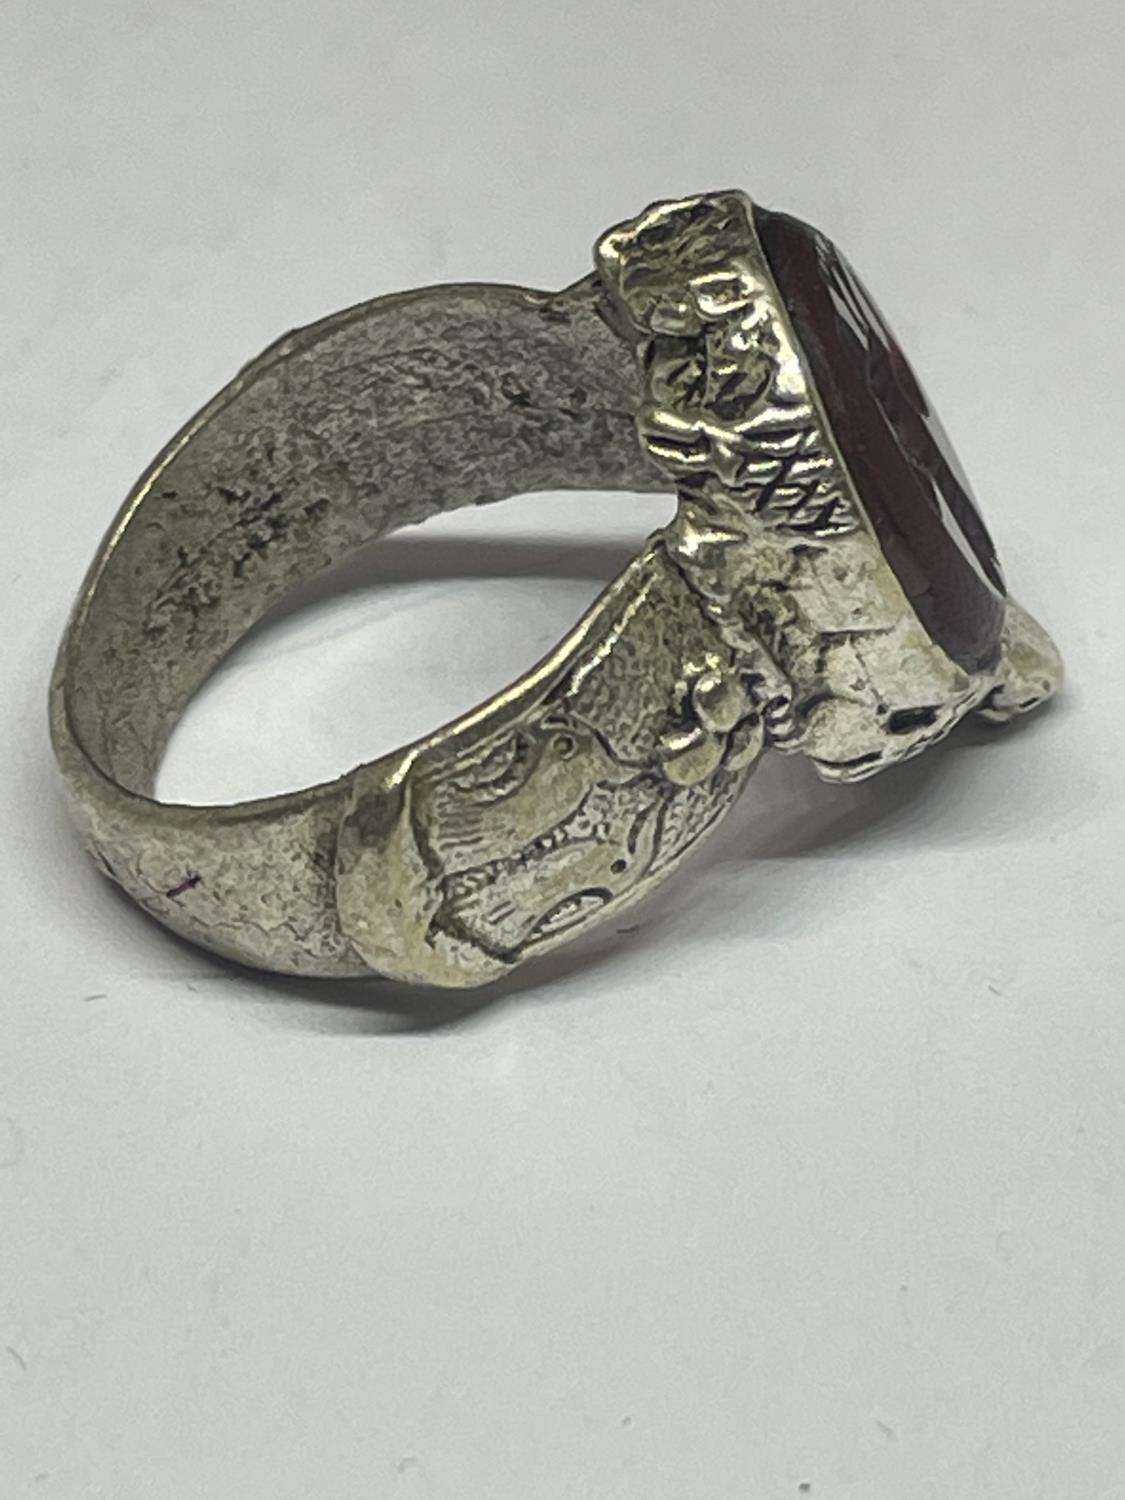 A MARKED SILVER RING WITH A TURTLE DESIGN SEAL INA PRESENTATION BOX - Image 3 of 5